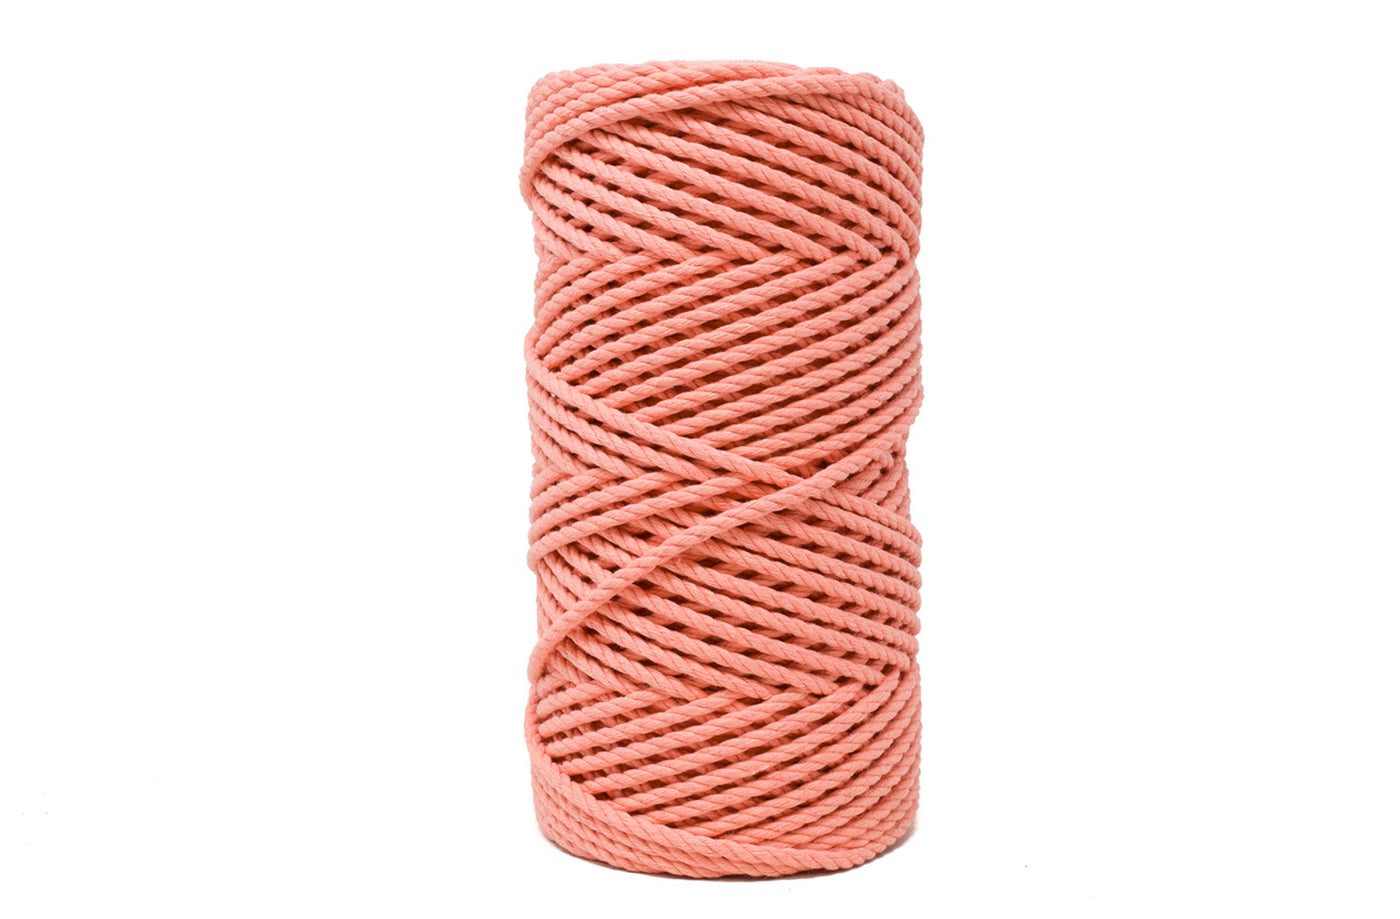 COTTON ROPE ZERO WASTE 3 MM - 3 PLY - FRUIT PUNCH COLOR